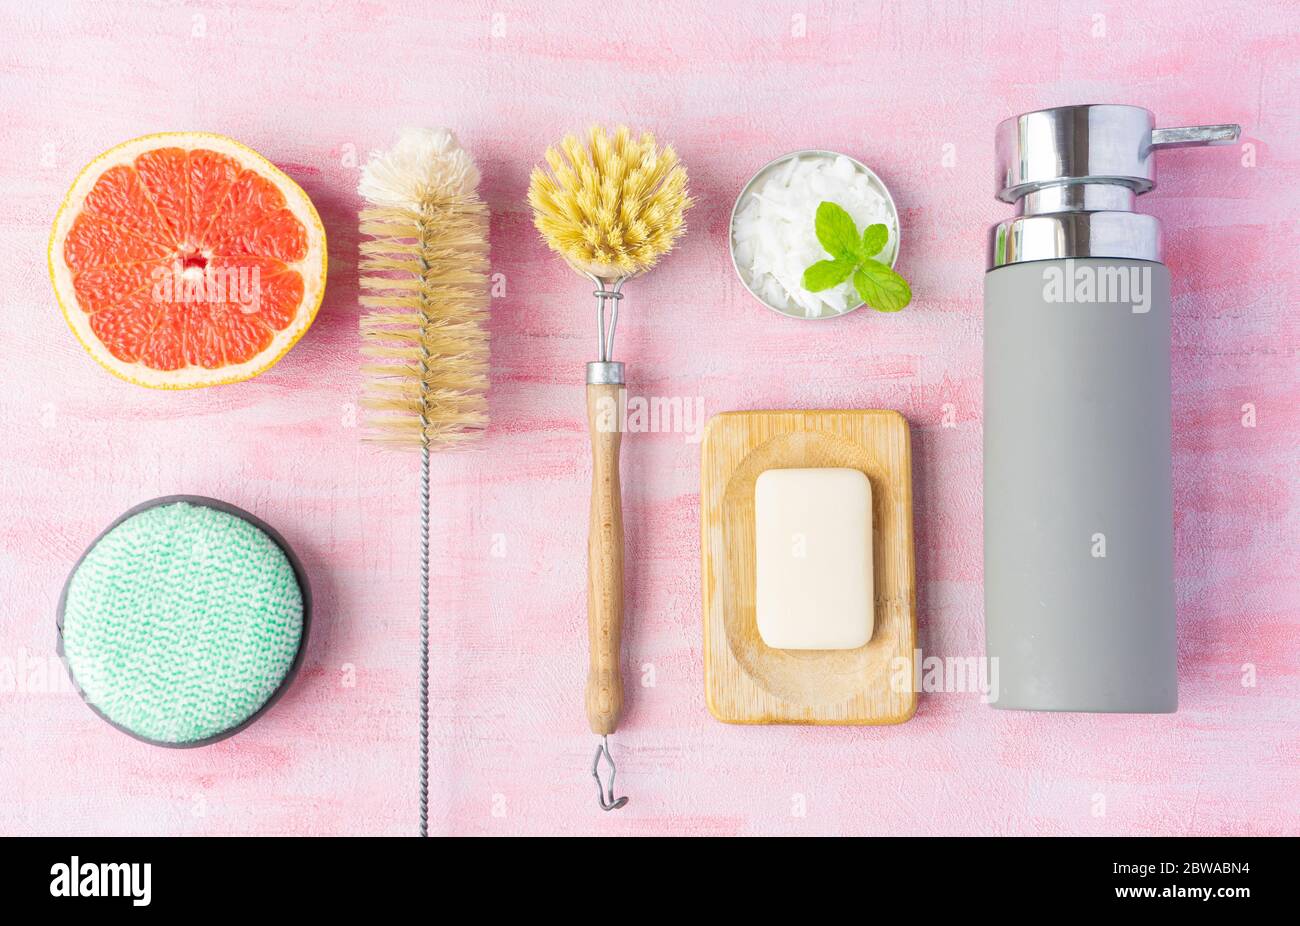 Bottle and dish brush, soap, cleaning powder, cotton washcloth for dishes. Grapefruit and mint near it. Zero waste and natural ingredients home cleaning concept. Top view, layout.ish brush, soap, cleaning powder, cotton washcloth for dishes. Grapefruit and mint near it. Zero waste and natural ingredients home cleaning concept. Top view, layout. High quality photo Stock Photo